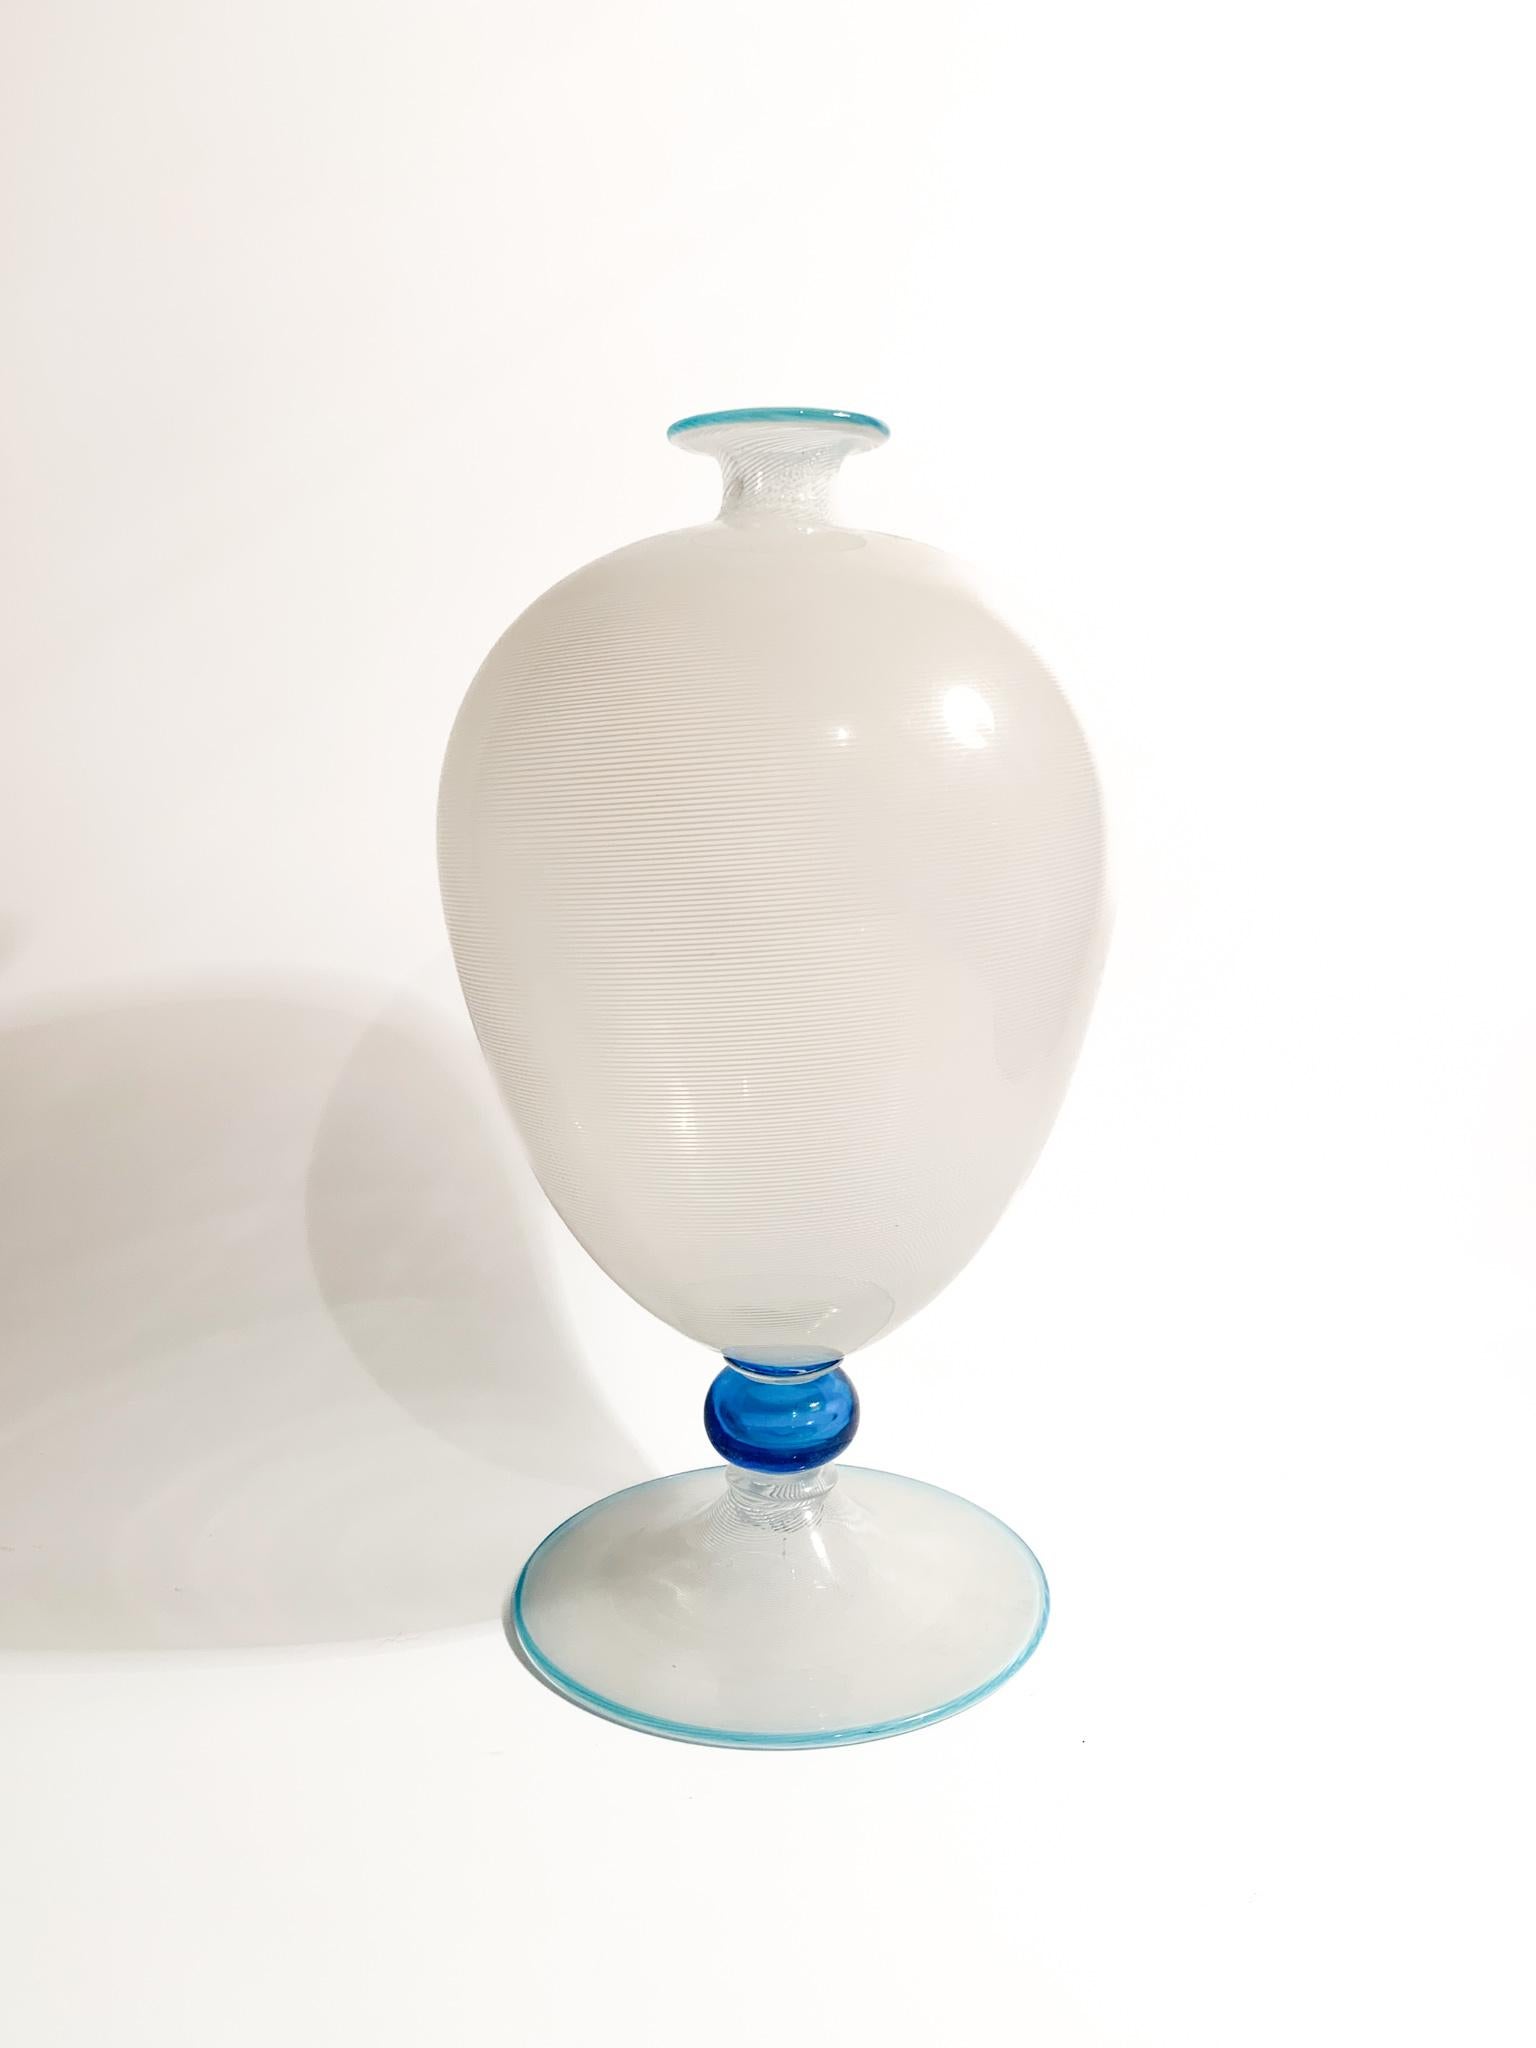 Veronese Model Vase in white and light blue Murano glass, made with the filigree technique by Barovier & Toso in the 1950s

Ø 16 cm h 30 cm

Barovier & Toso is a glass factory, known for its handcrafted collections of decorative Murano glass in the